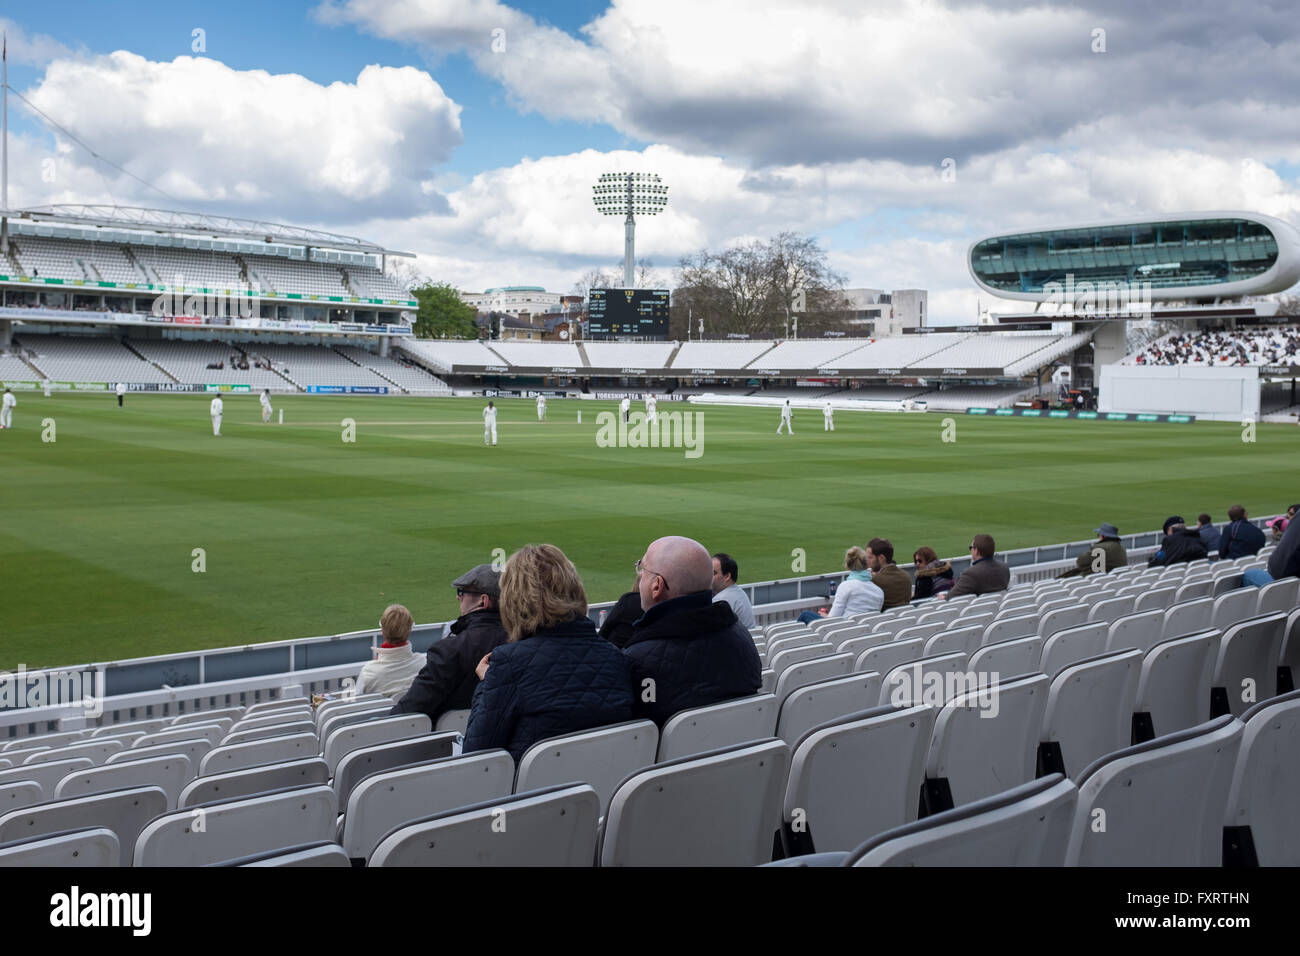 Crowd at county cricket match between Middlesex & Warwickshire at Lord's, April 2016 Stock Photo